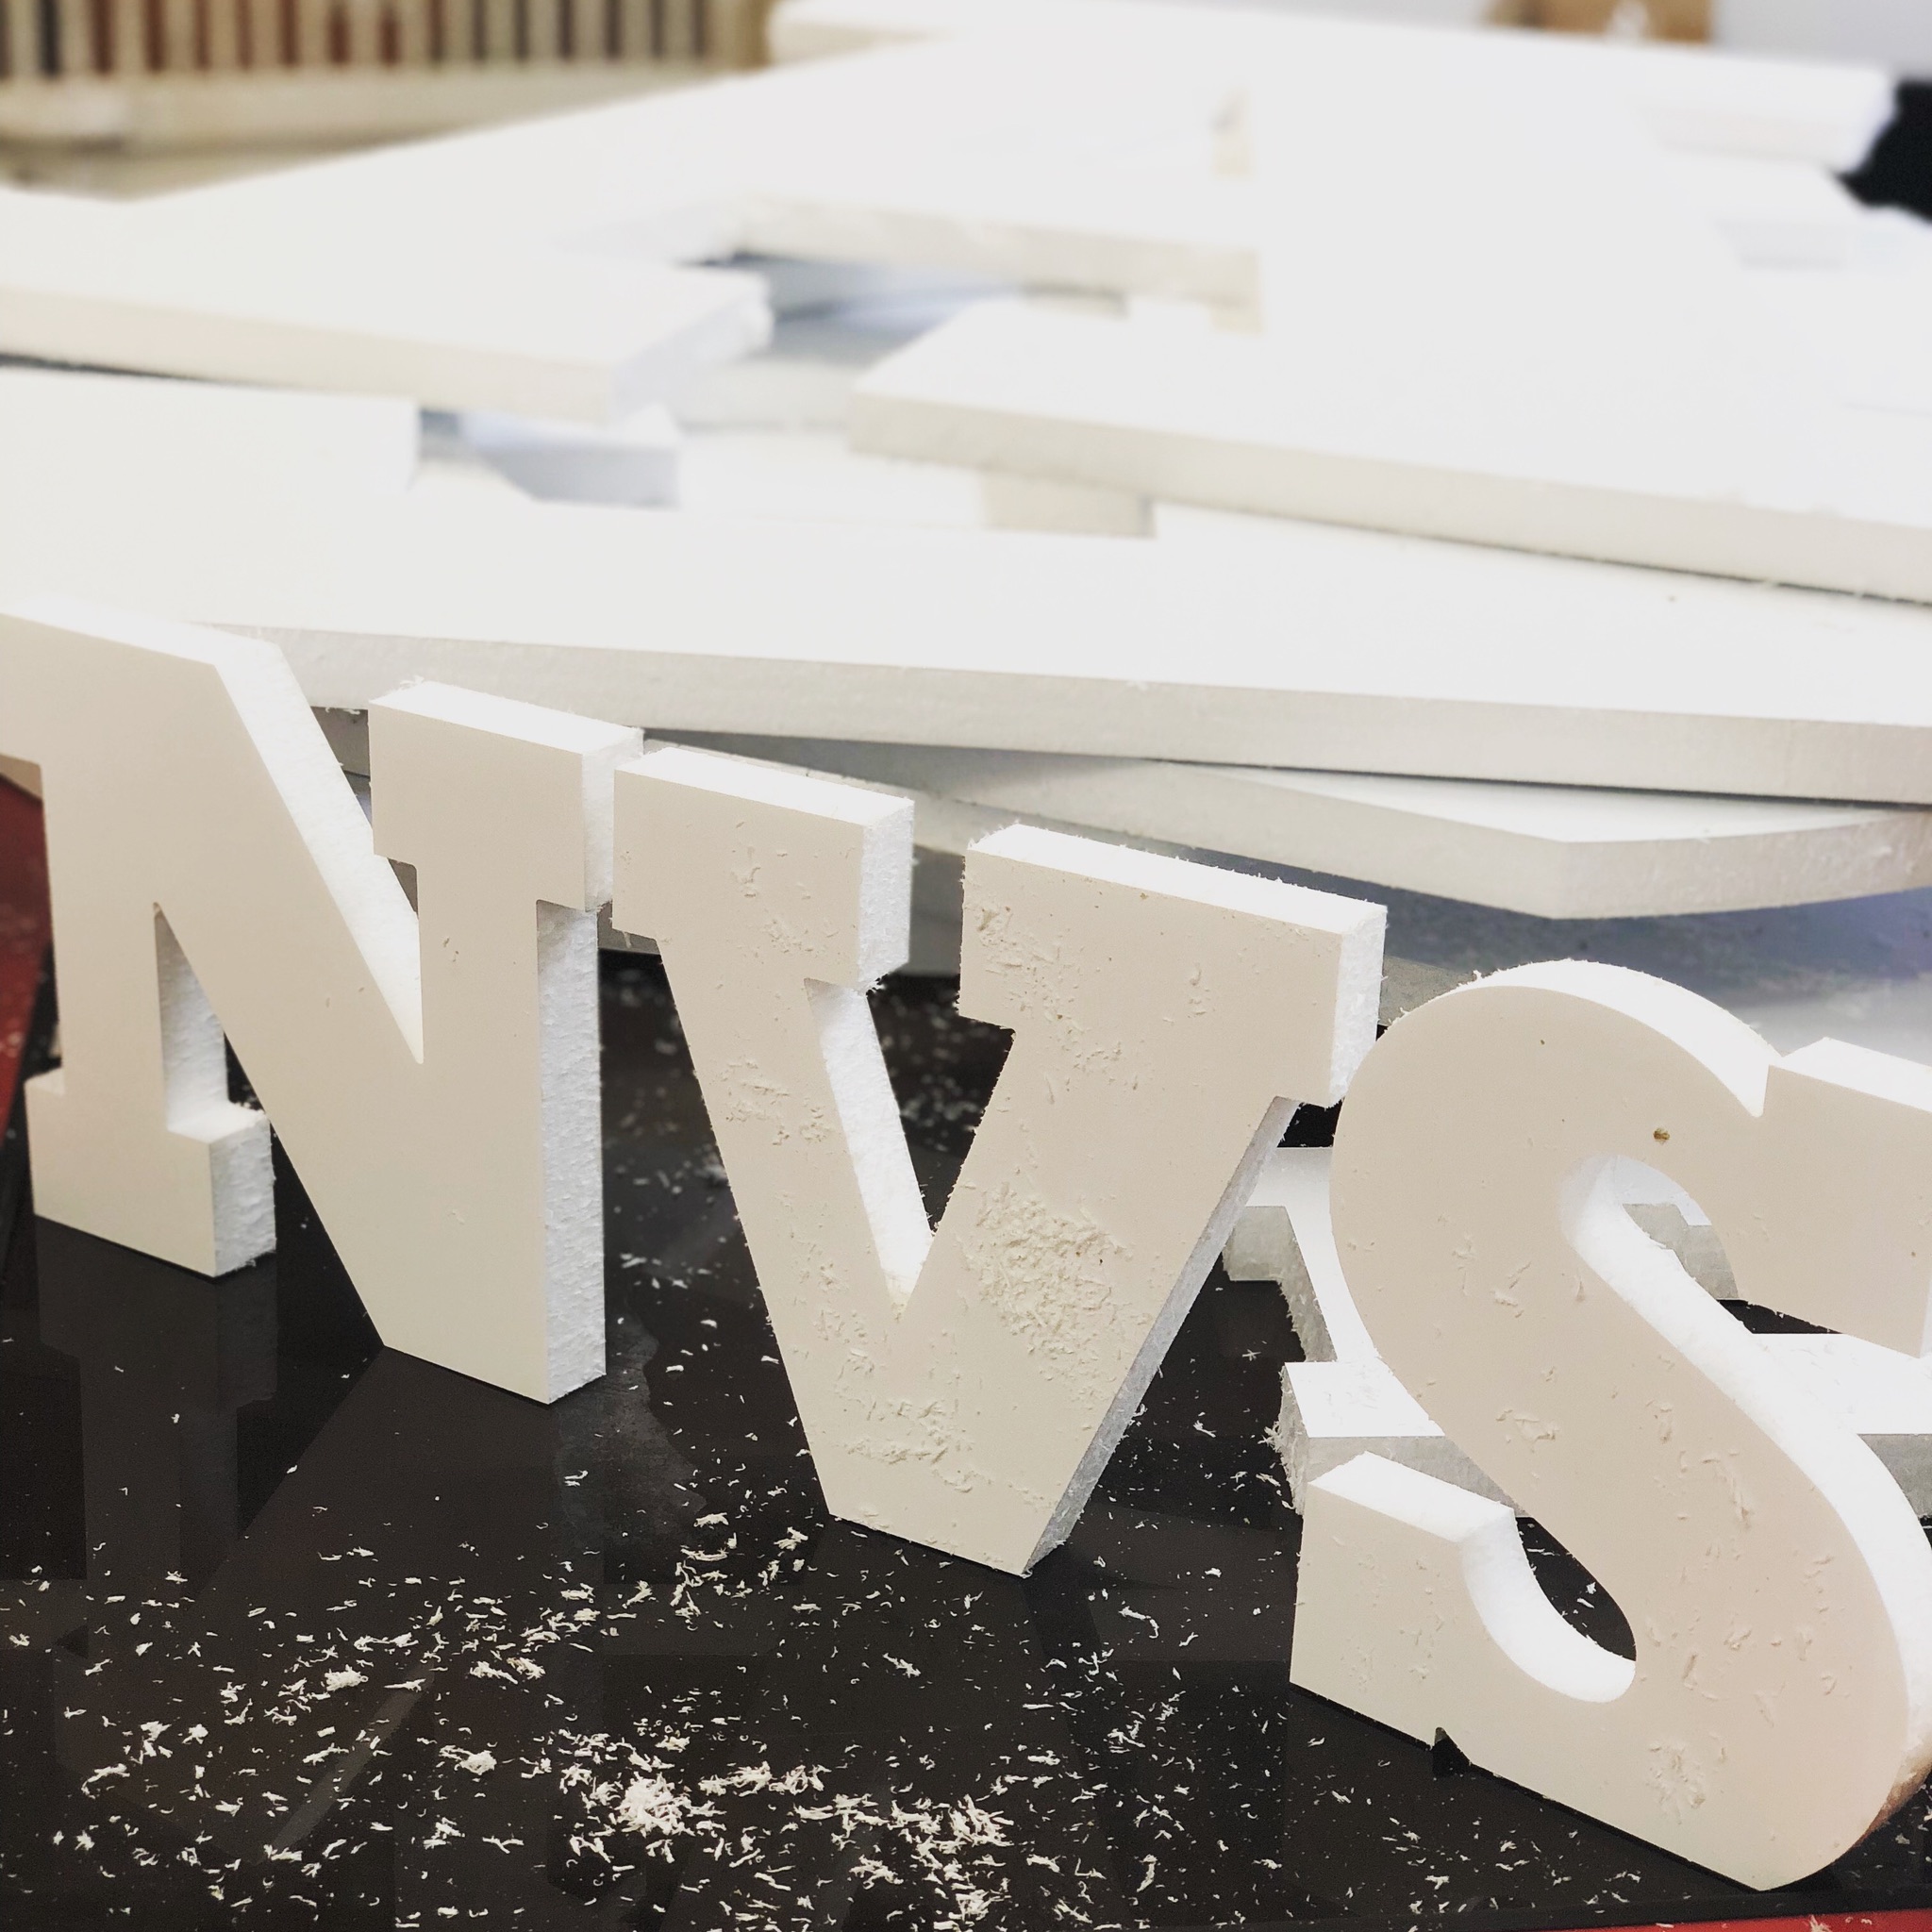 Full Service Commercial Printing and Fabrication - NYC - NVS Visuals